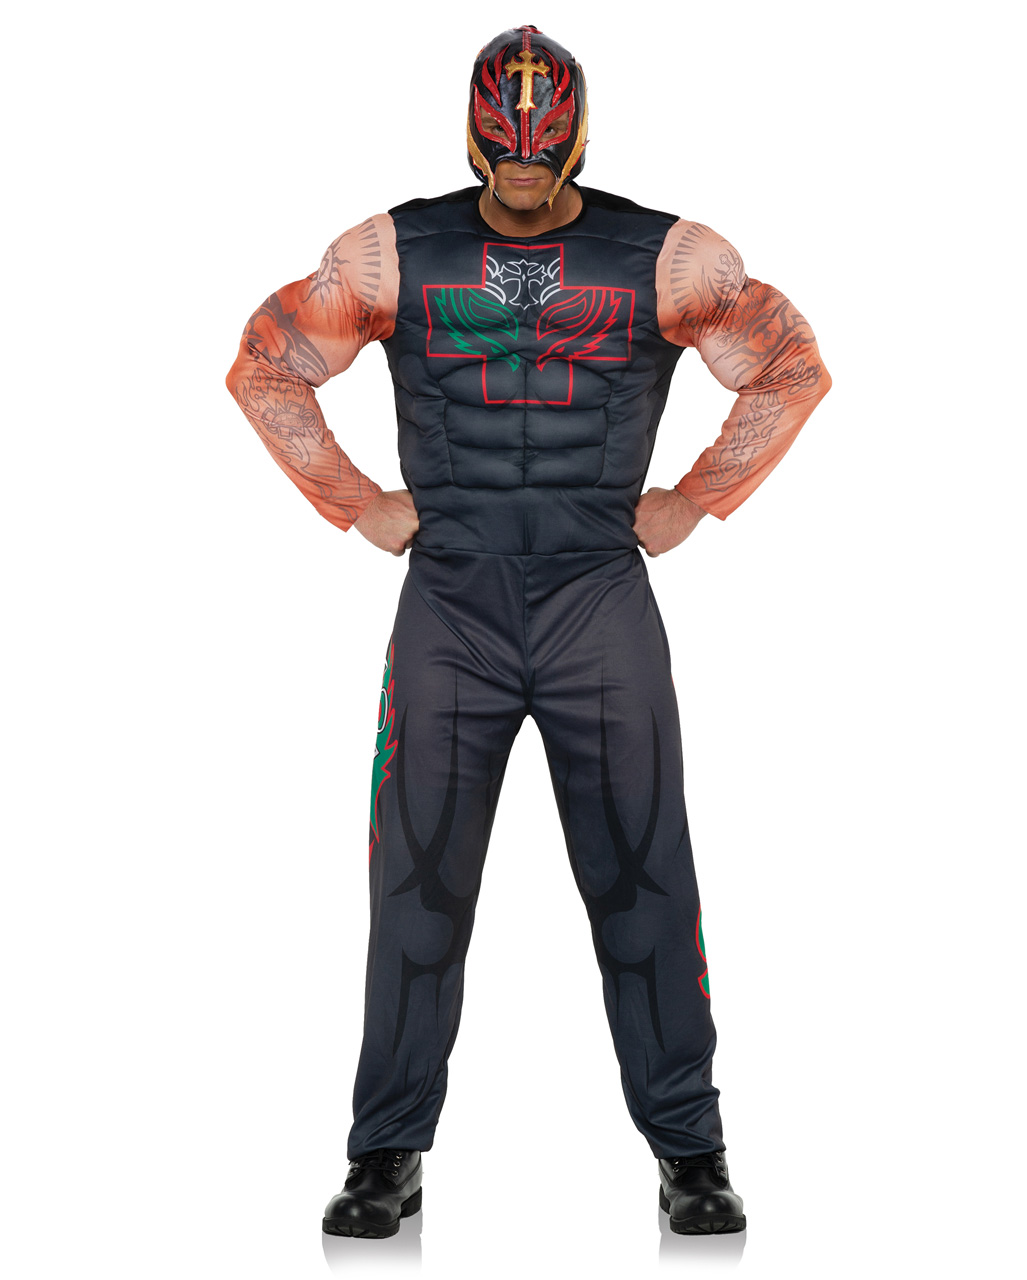 Kids- Fit 4 to 7 y/o Costume Wear by Make It Count Red REY MISTERIO Youth Lucha Libre Wrestling Mask Green 